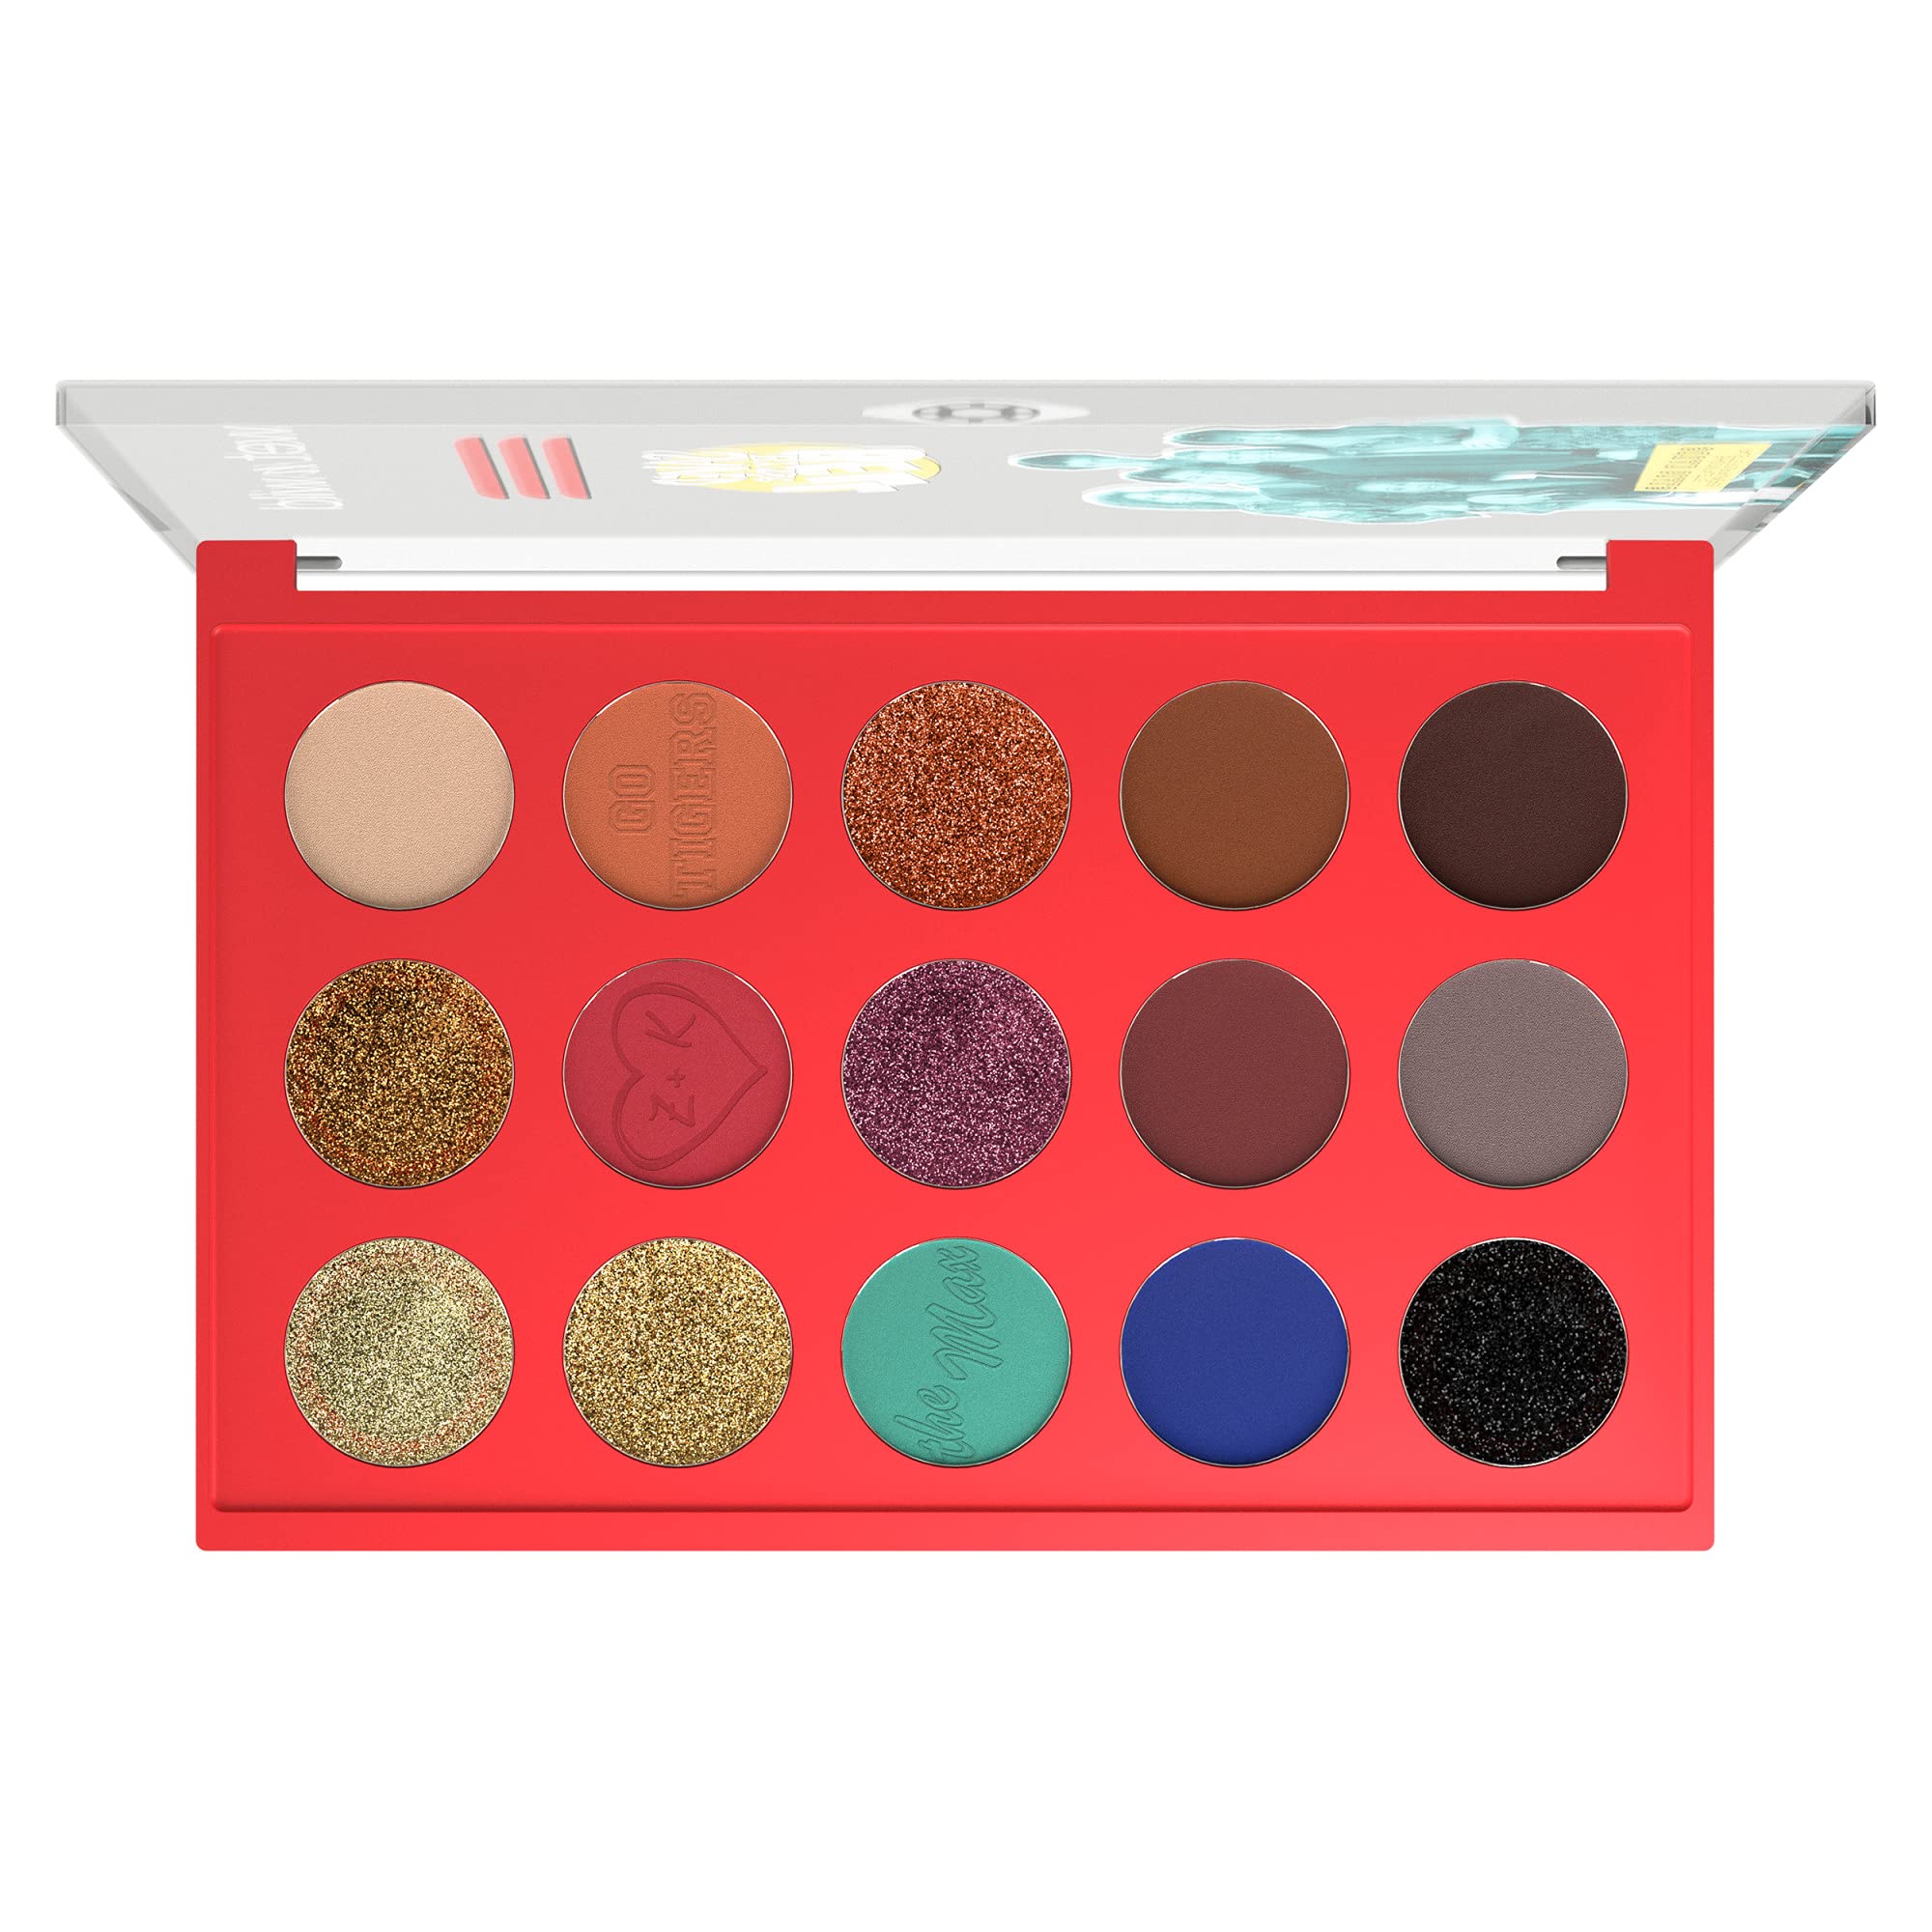 wet n wild Saved By The Bell Squad Goals Shadow Palette, Blendable Makeup Pigments, Shimmer, Matte, Sparkle Finishes,1114539